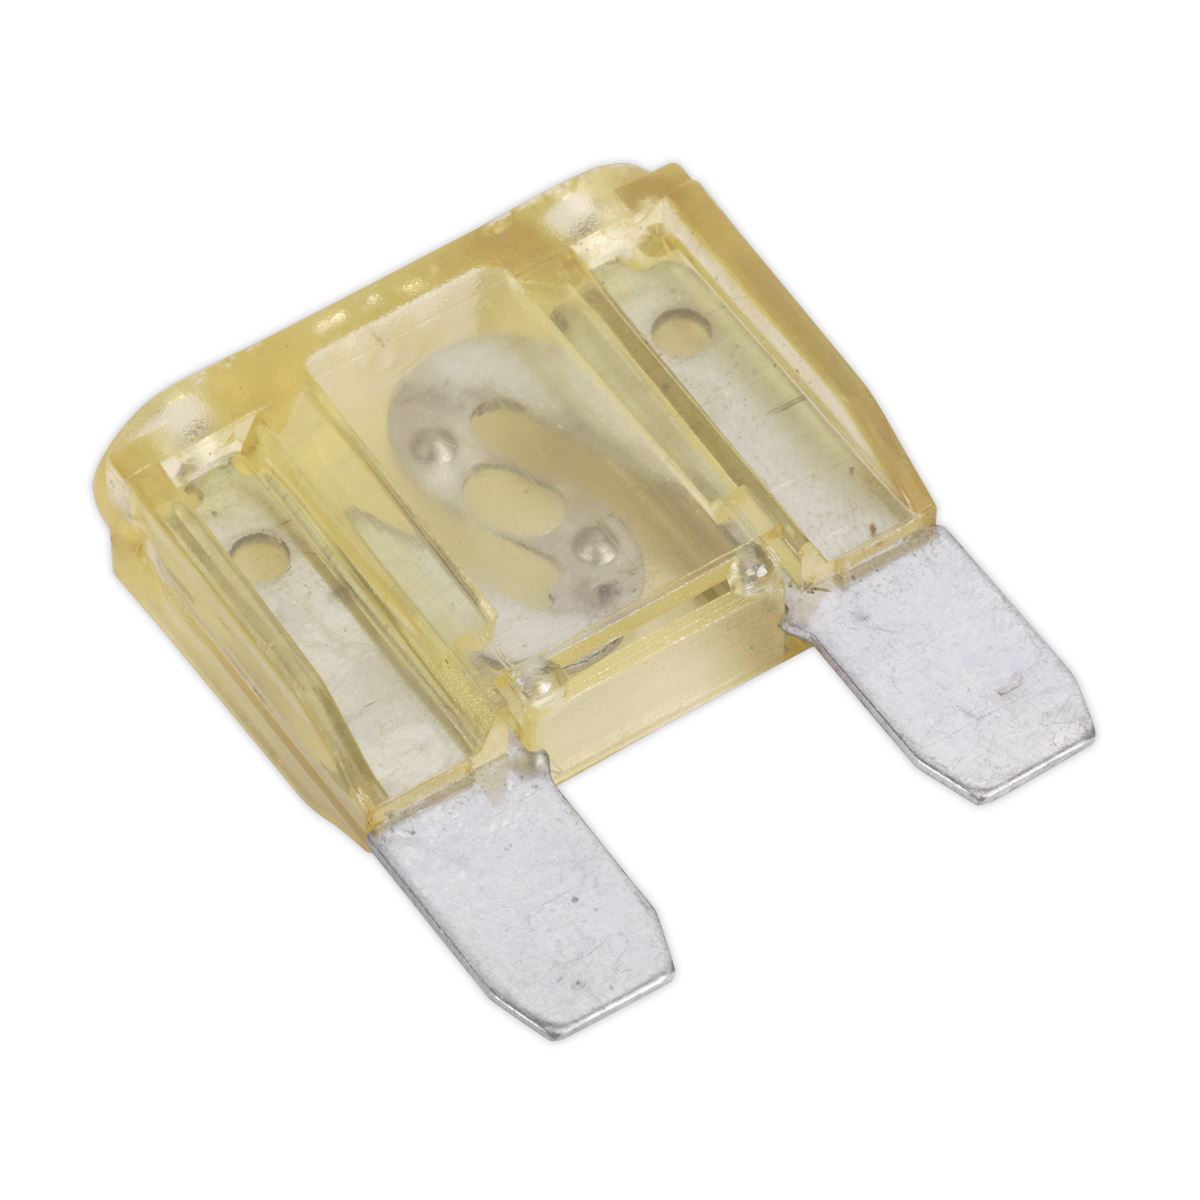 Sealey Automotive MAXI Blade Fuse 20A Pack of 10